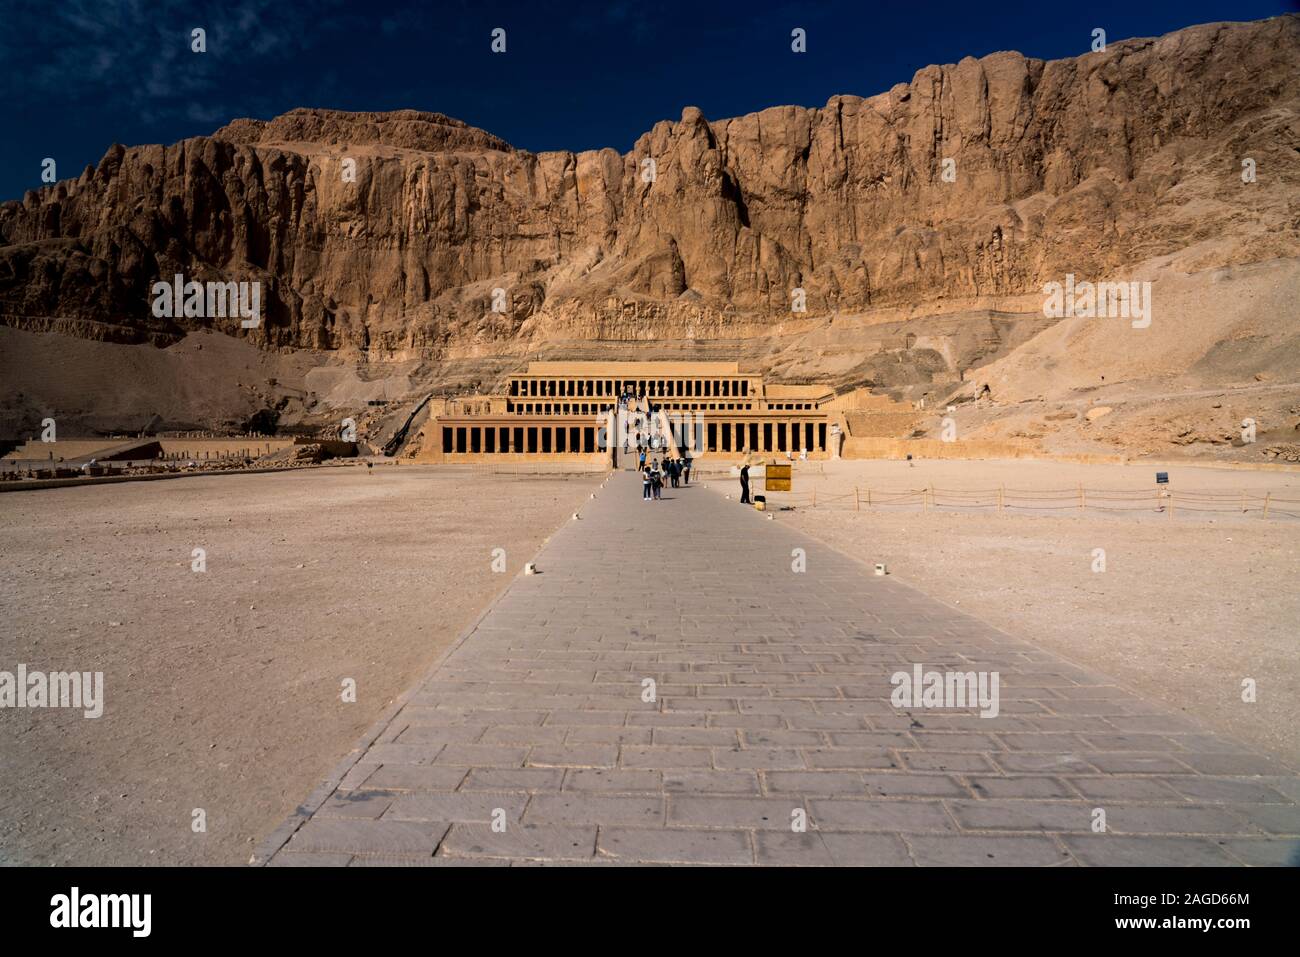 November 18, 2019, Valley of the Kings, Egypt, Mortuary Temple of Hatshepsut Built for the Eighteenth Dynasty pharaoh Hatshepsut is located at Deir el-Bahari near the Valley of the Kings Stock Photo